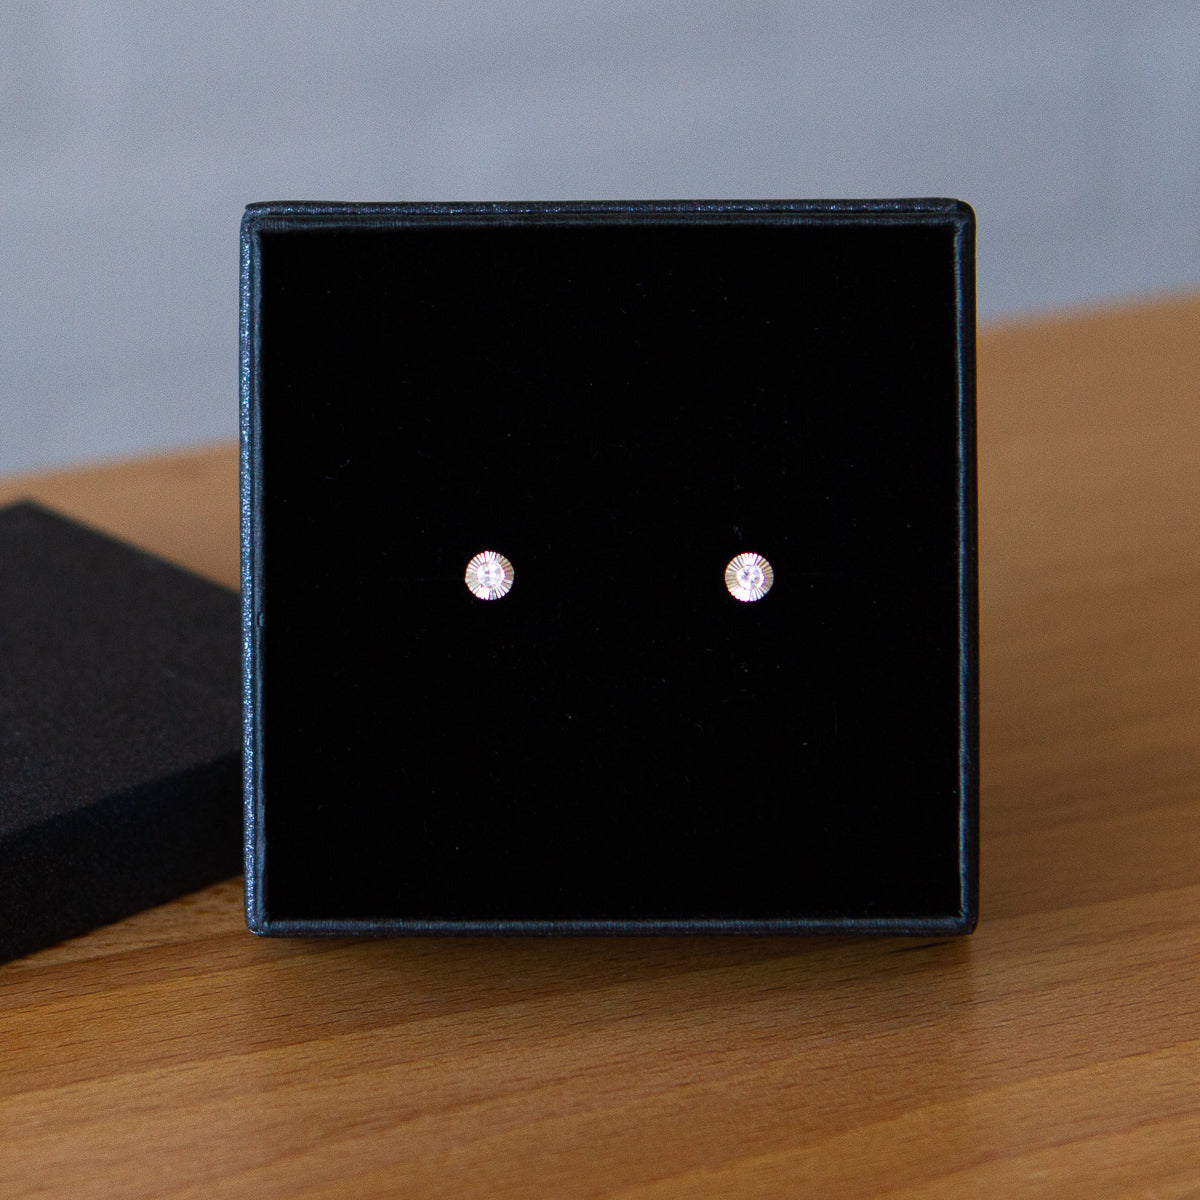 Sterling silver small engraved Aurora stud earrings with moonstone centers in a gift box